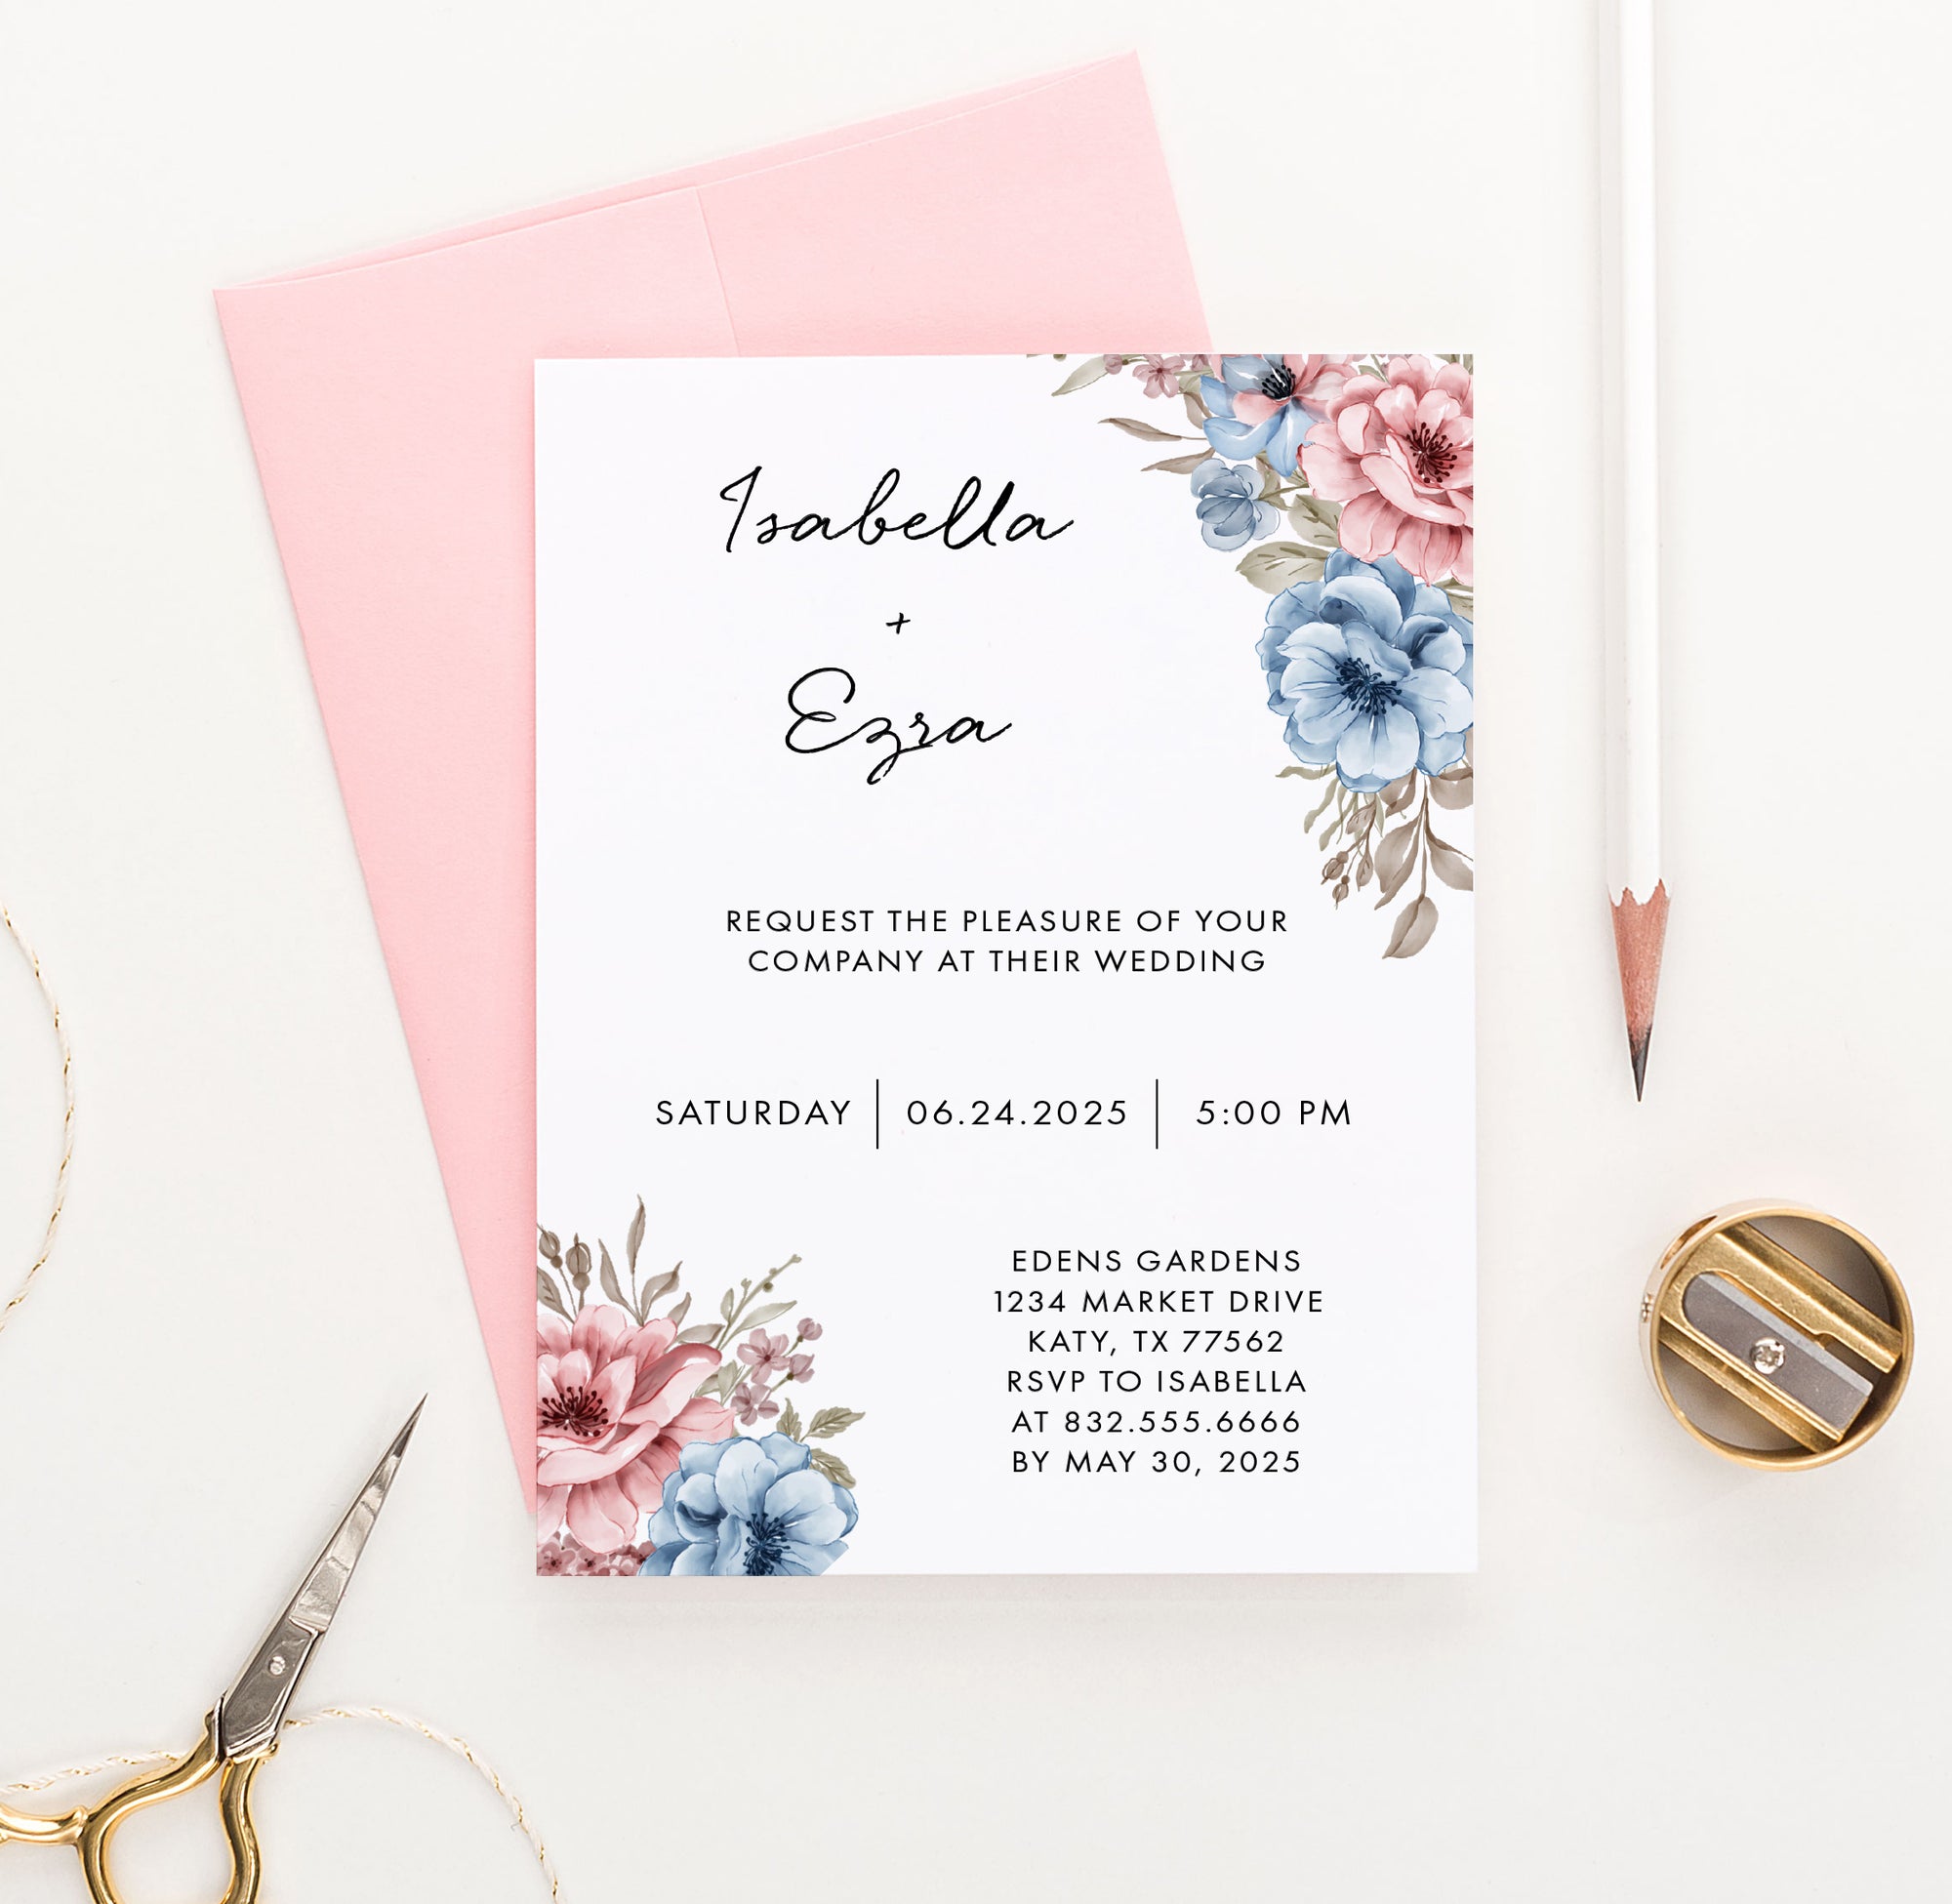 WI055 Pink and Blue Floral Wedding Invites Personalized invitations marriage florals flowers flower elegant modern classy watercolor